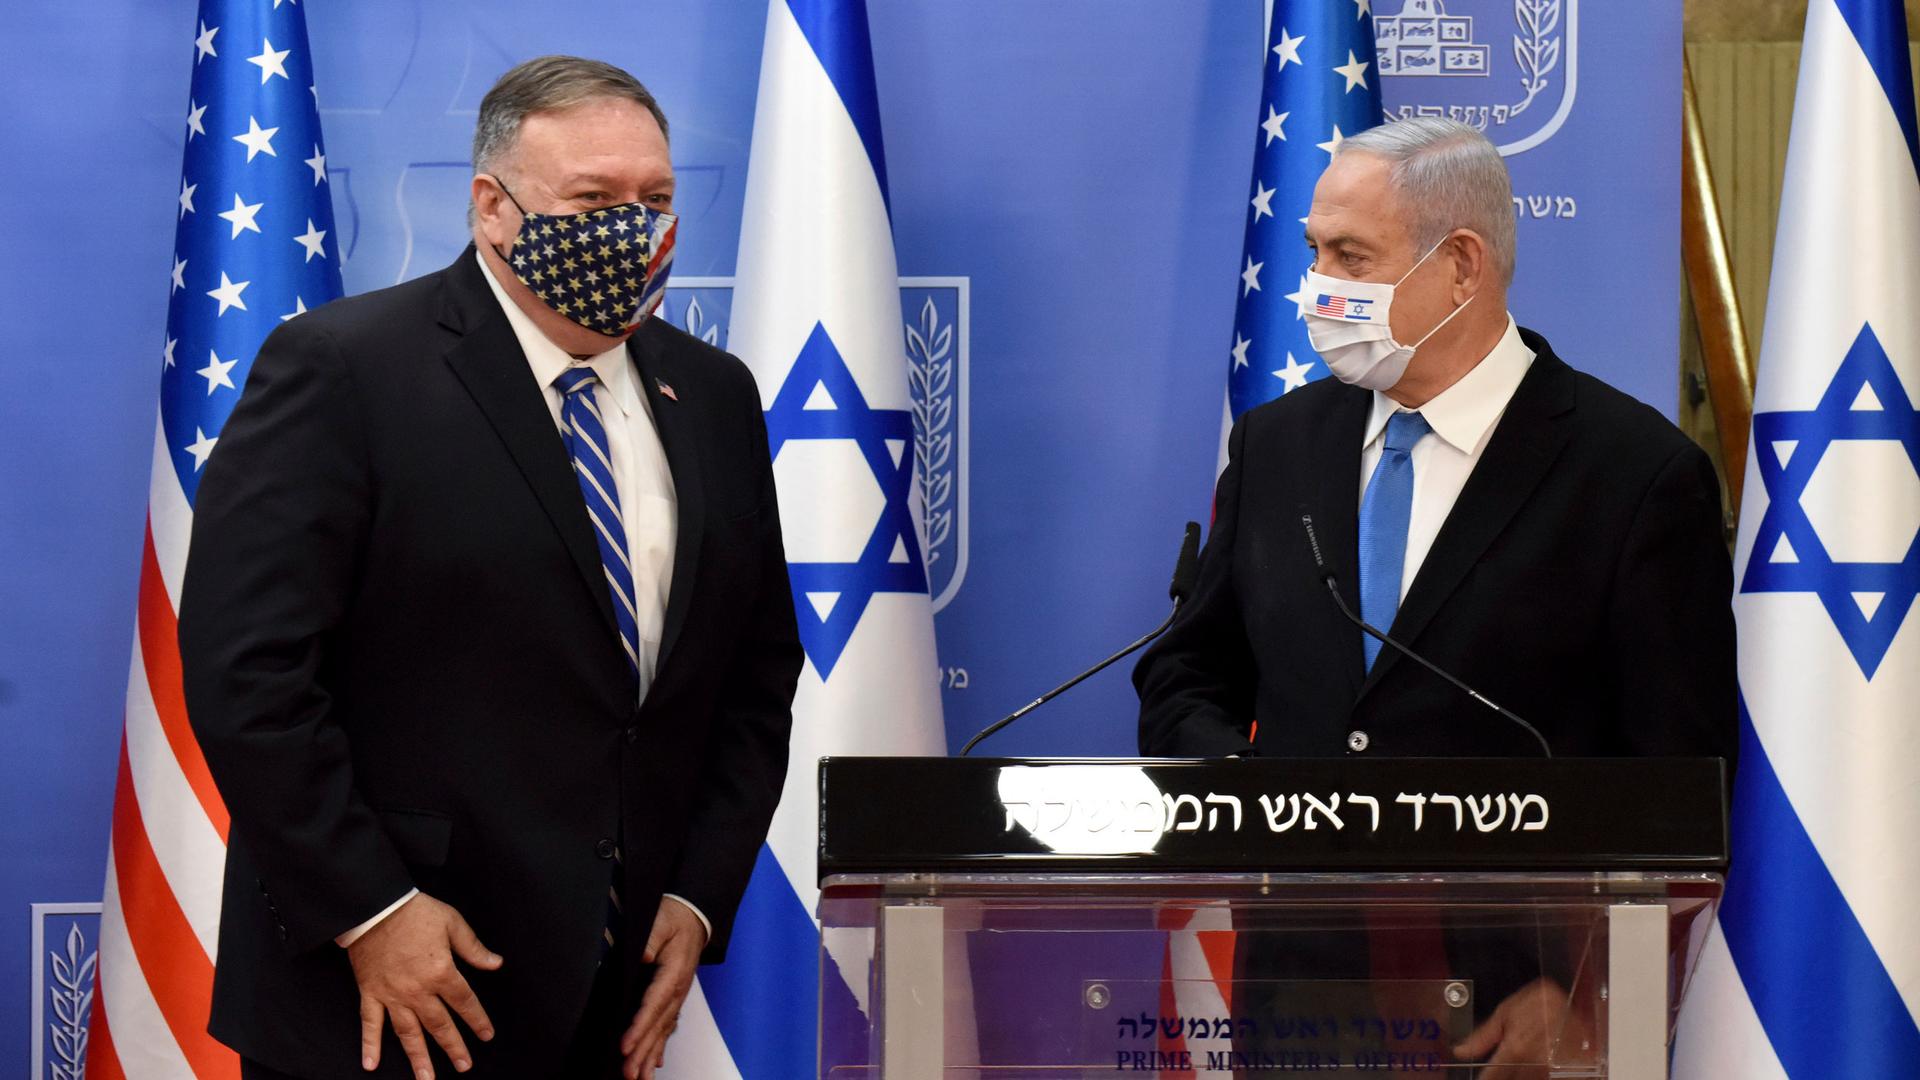 US Secretary of State Mike Pompeo is shown standing next to Israeli Prime Minister Benjamin Netanyahu who is standing behind a podium, both wearing masks.